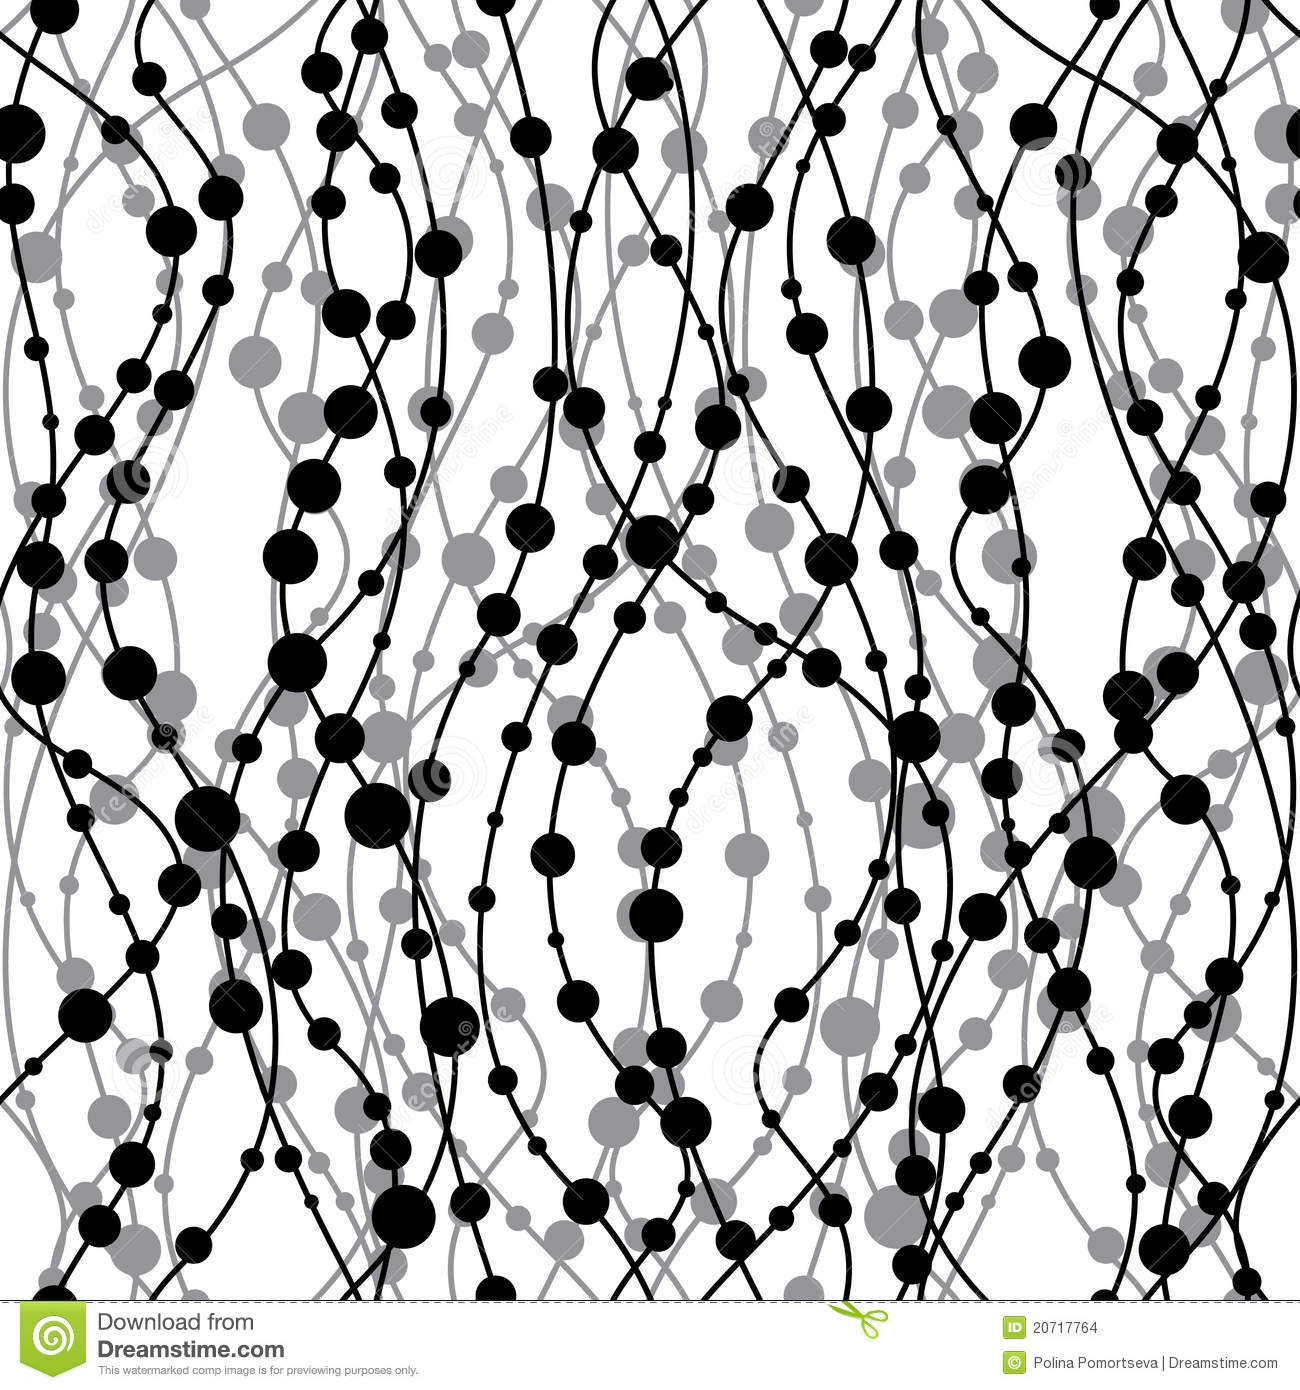 14-black-and-white-seamless-pattern-design-images-black-and-white